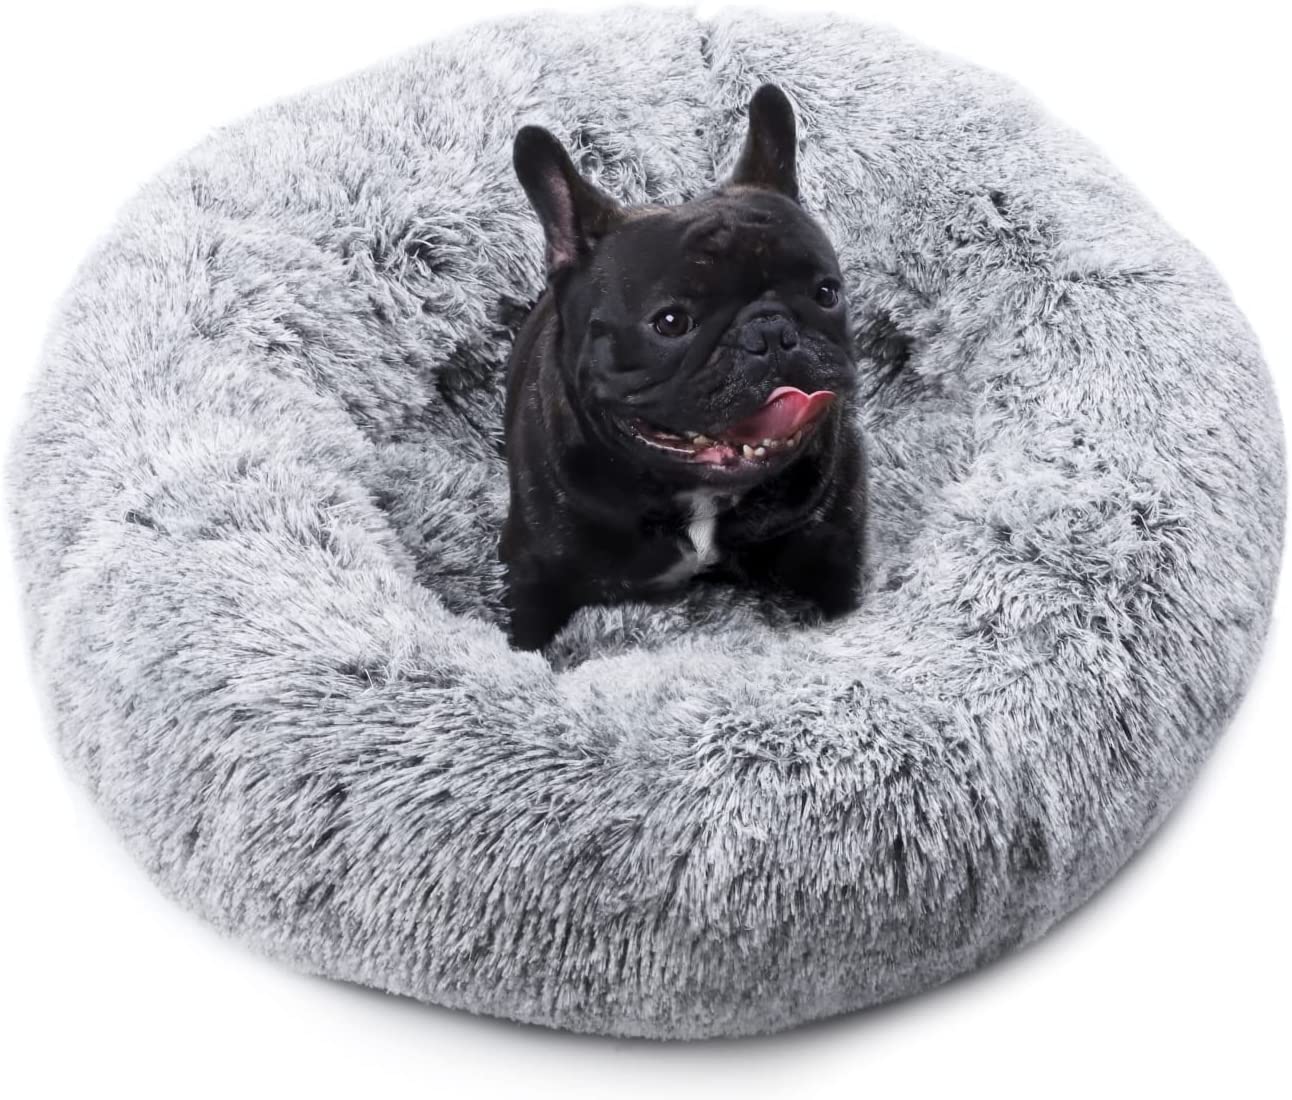 Shu Ufanro Washable Calming Round Donut Pet Bed for Cats or Small Dogs (Grey) $24 + Free Shipping